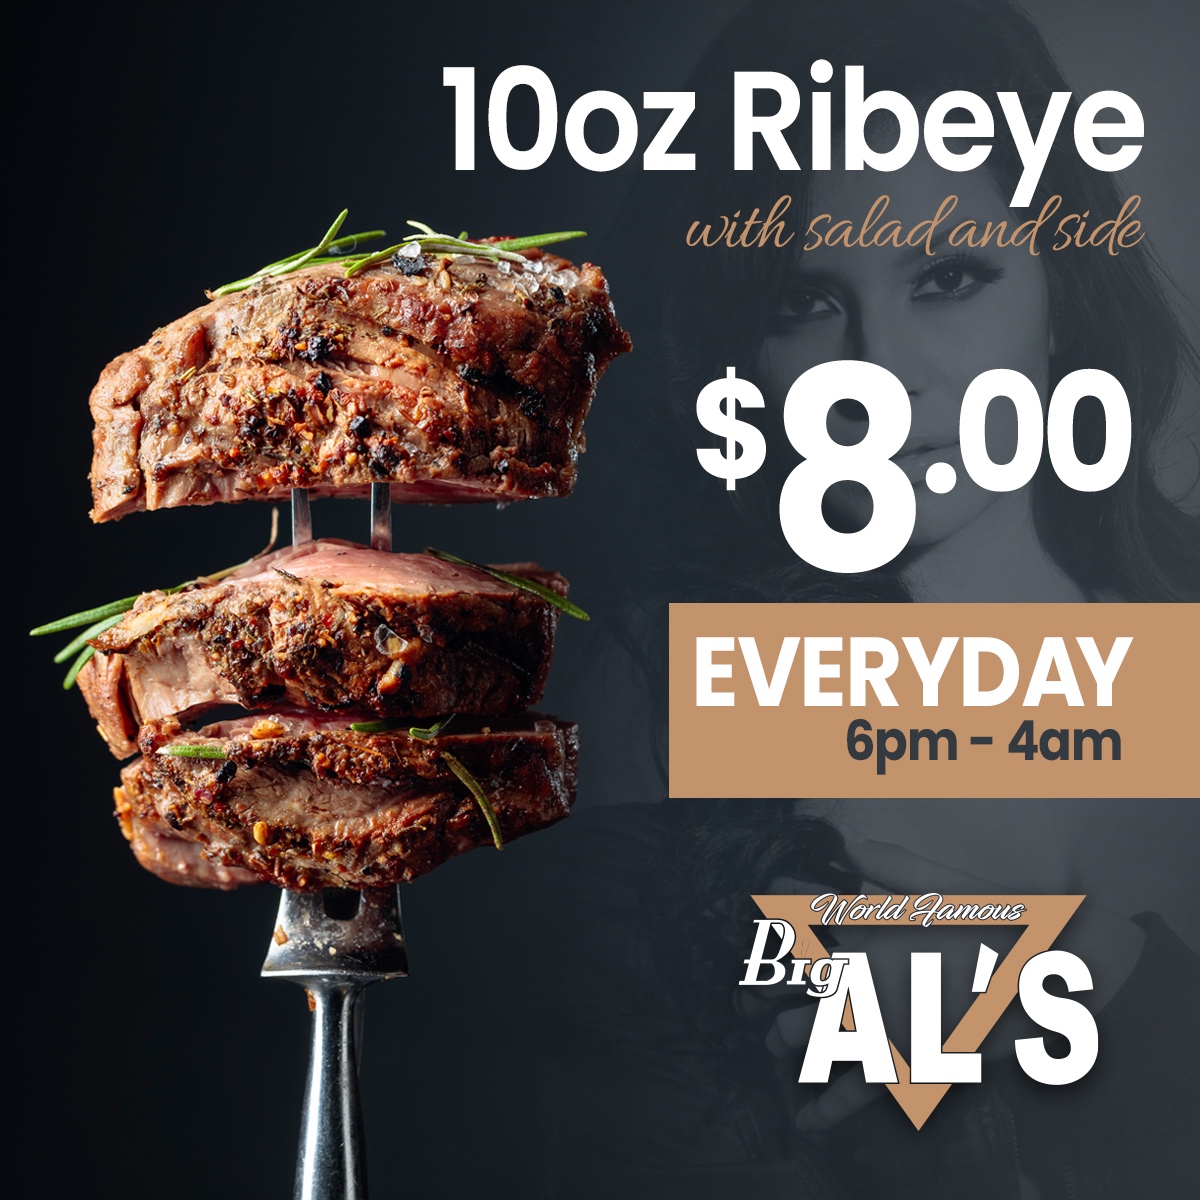 Steak dinner with a view? Don't mind if I do! 10oz ribeye with salad & a side only $8 EVERY DAY at Big's Al's! . . #peorianightlife #peoriastripclubs #peoriaIL #illinois #ubereats #VIPRoom #Fun #Restaurant #BigAls #BigAlsGals #Peoria #Speakeasy #Showgirls #steakdinner